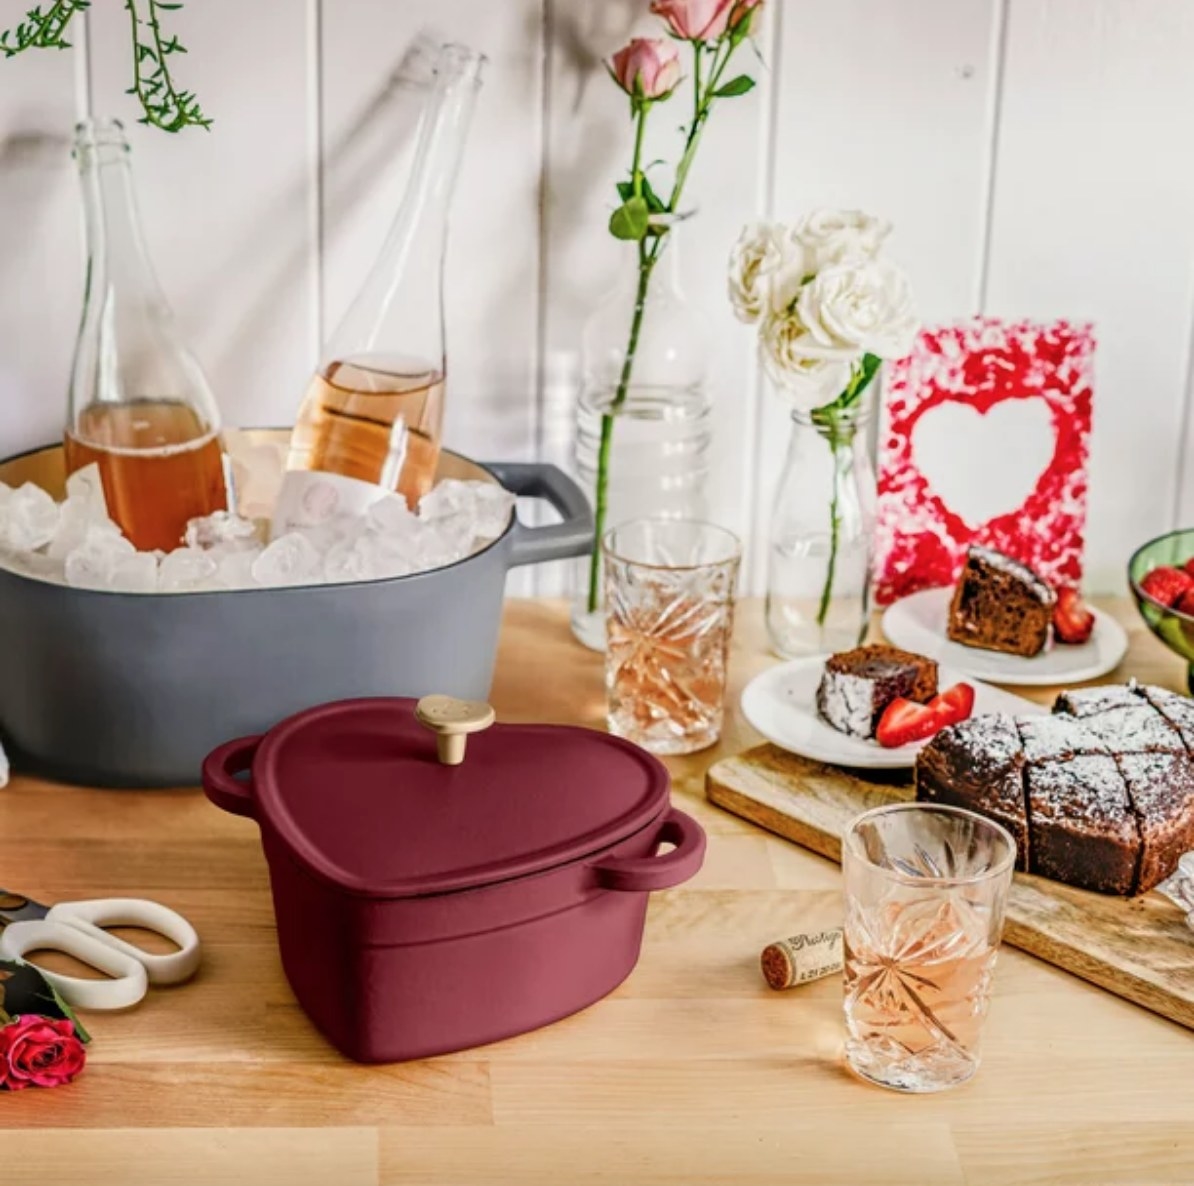 Red heart-shaped dutch oven on table with desserts and wine on ice